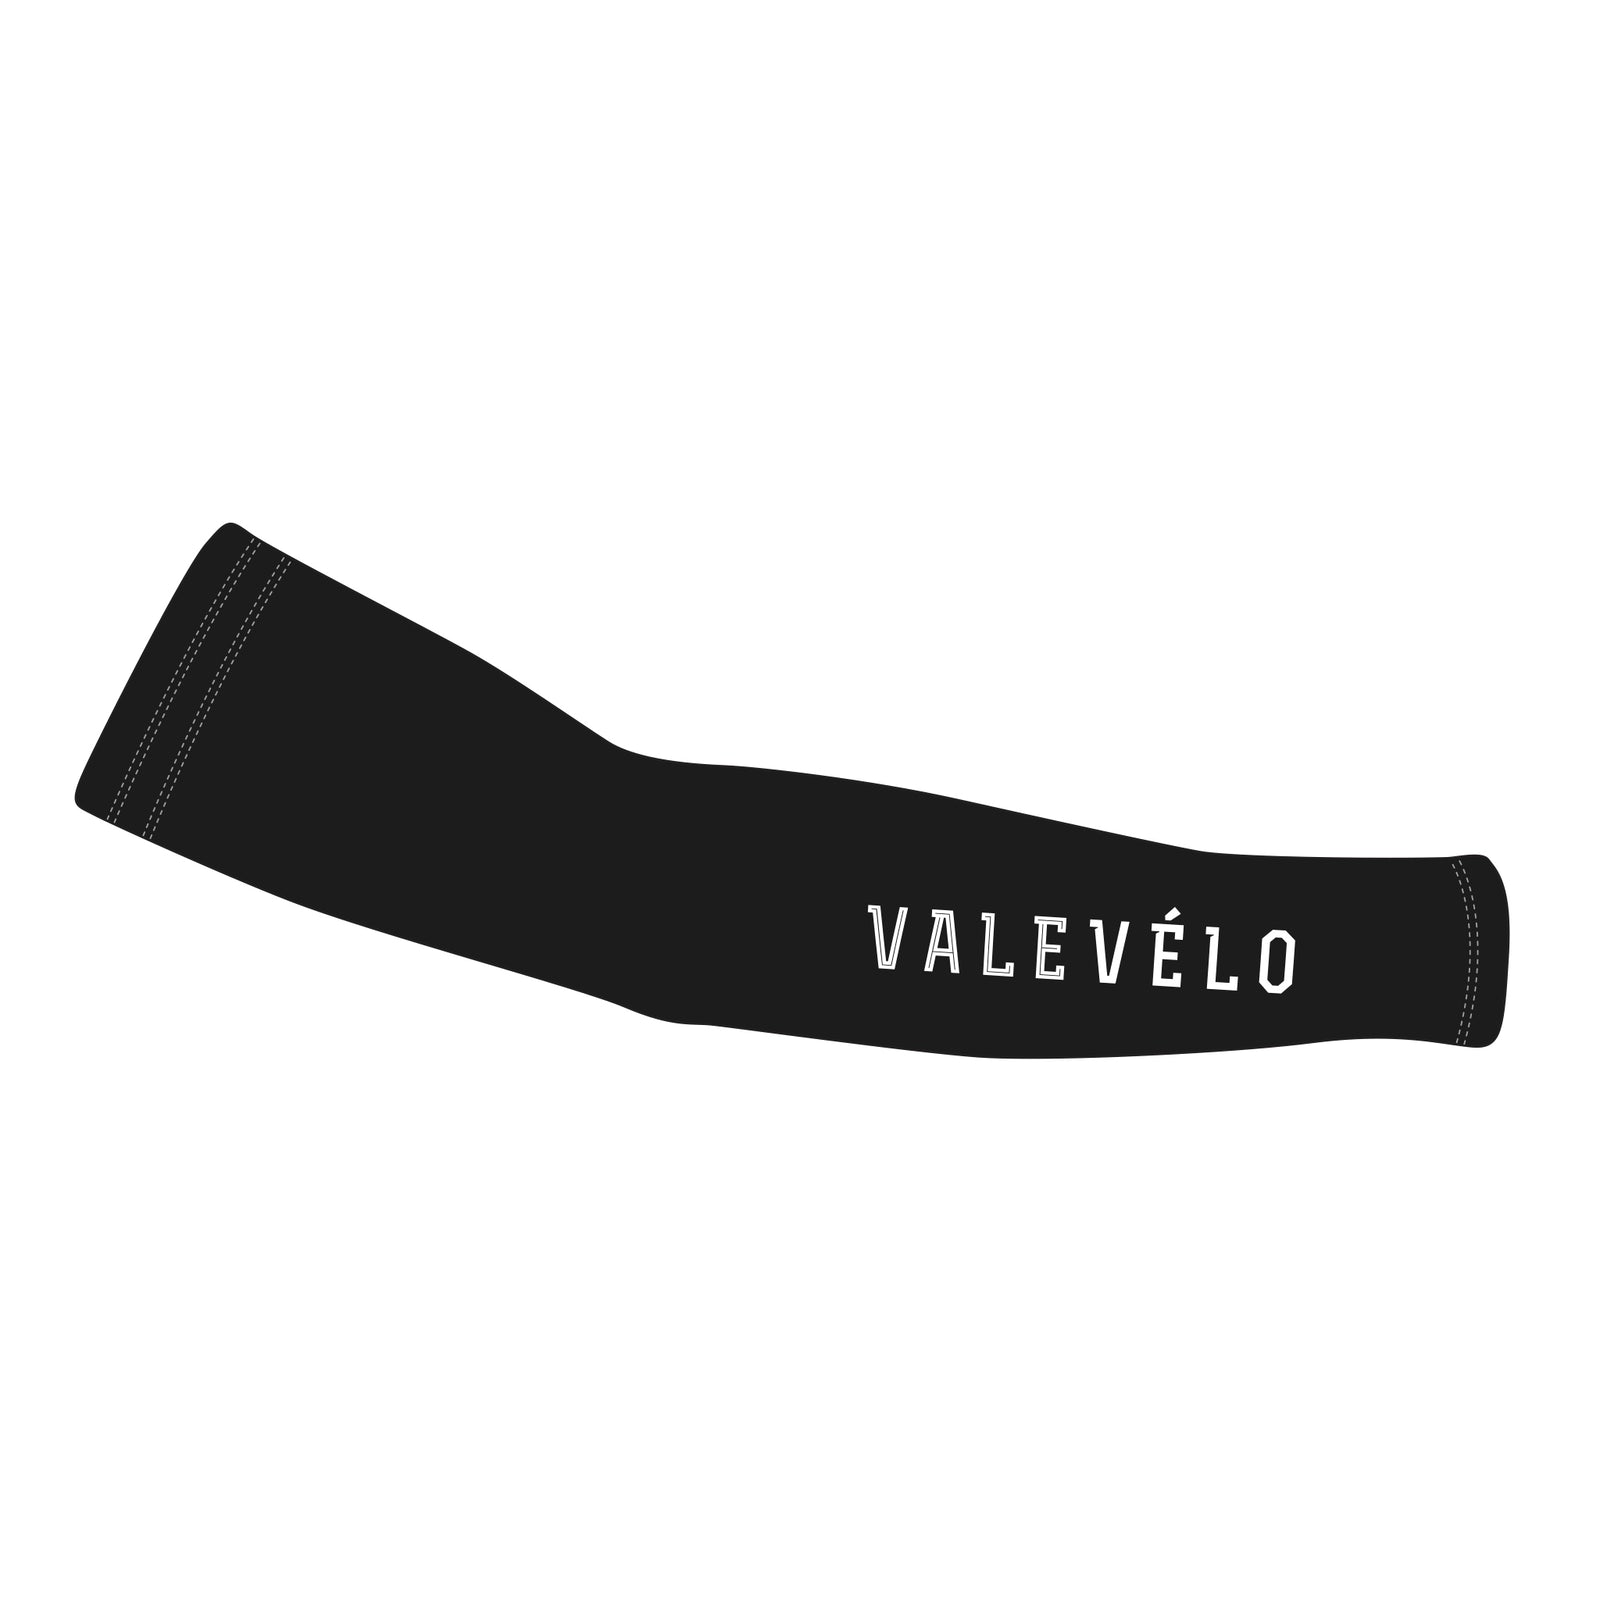 VALEVELO UNISEX SILVER Thermal Cycling Arm Warmers, BLACK